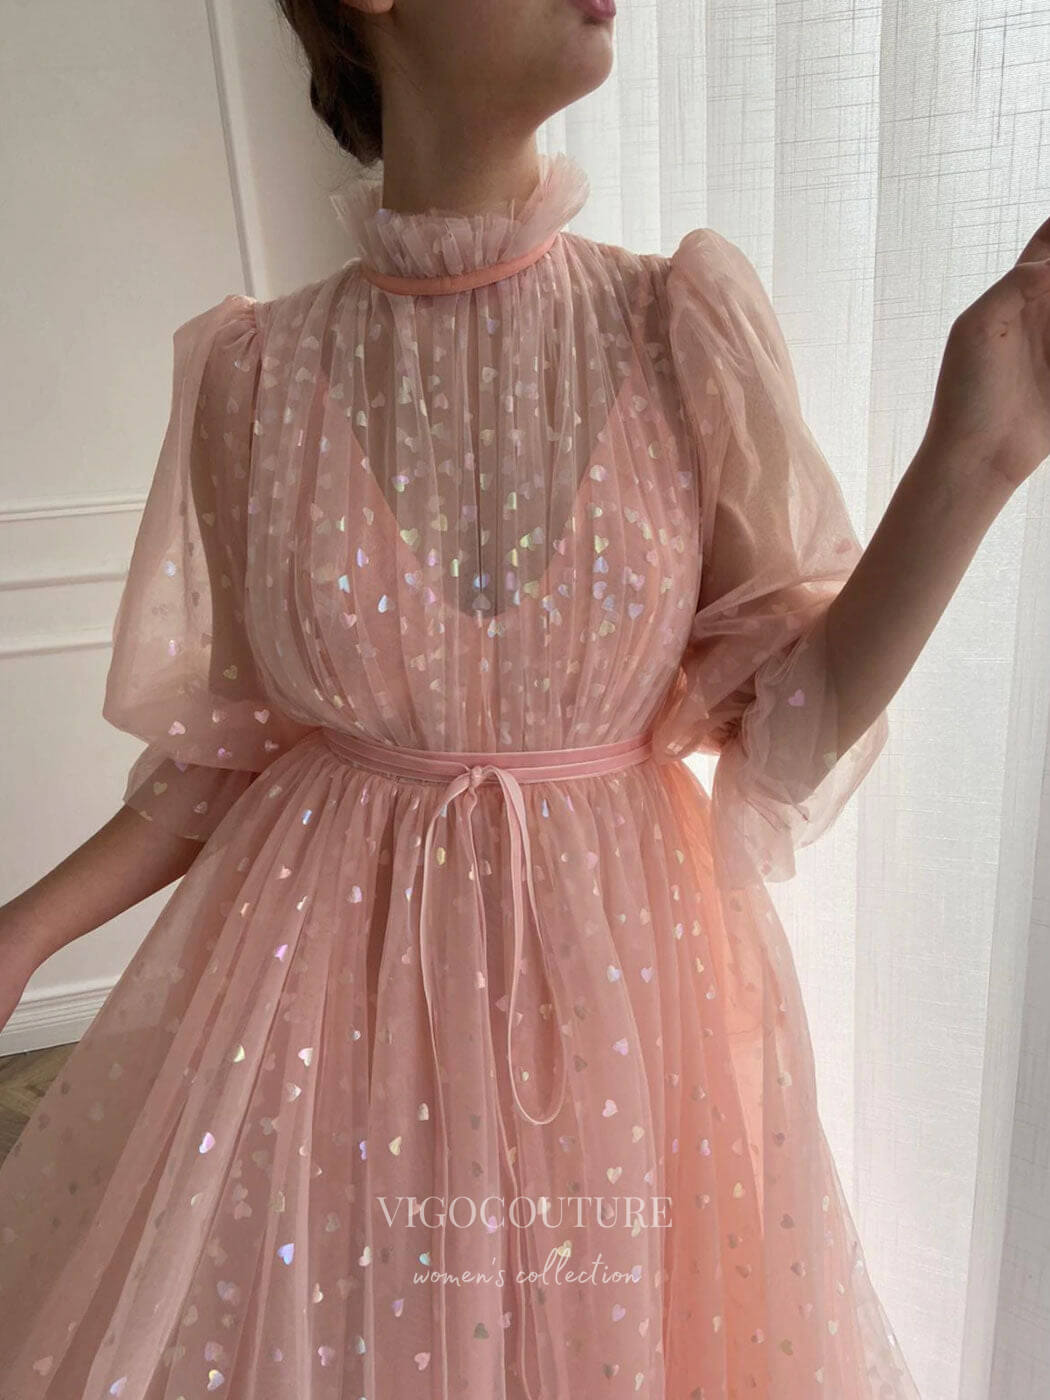 vigocouture-Blush Pink Starry Tulle Prom Dresses High Neck Elbow Sleeve Evening Dress 21777-Prom Dresses-vigocouture-